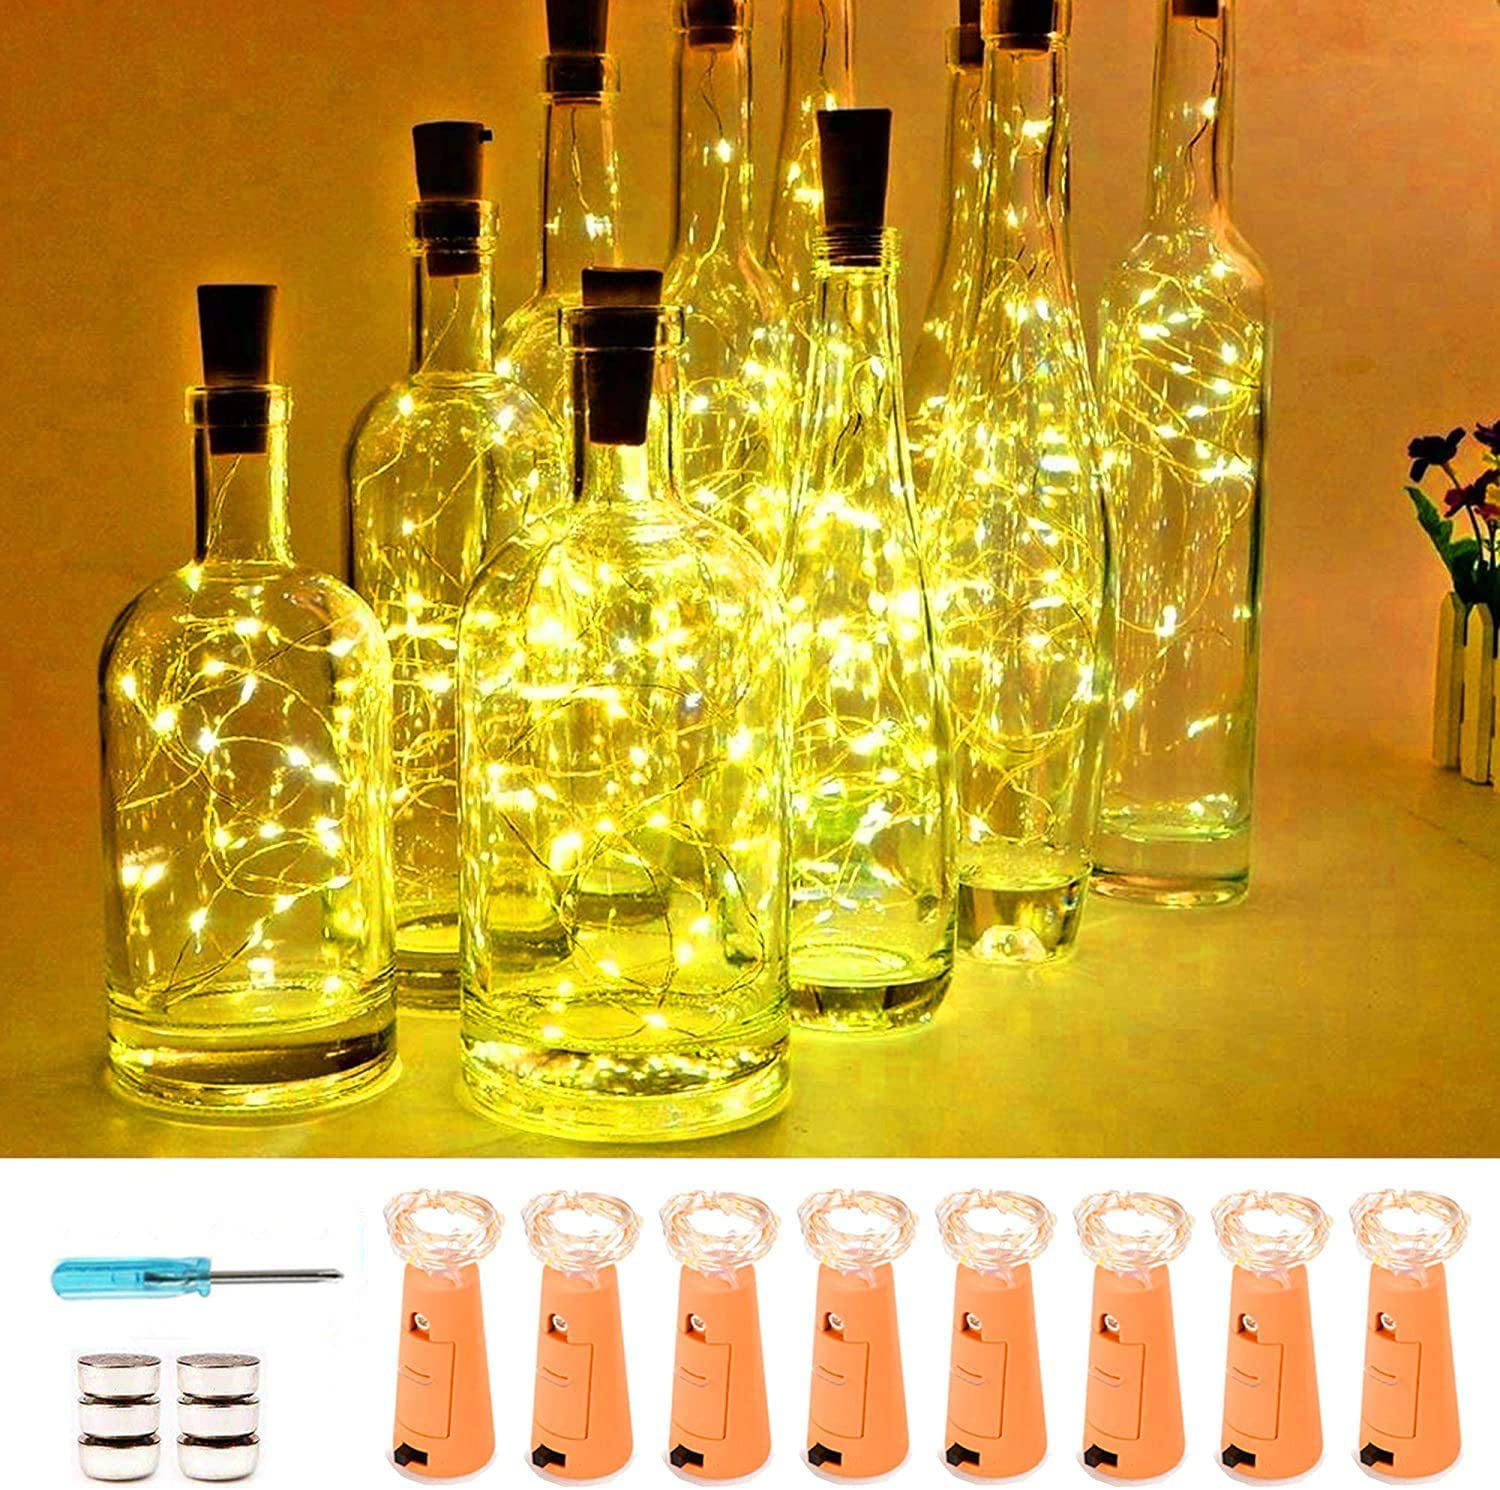 20 LED Wine/Beer Bottle Cork Fairy Lights Gold Wire Warm/Cool White Multi-Colour 